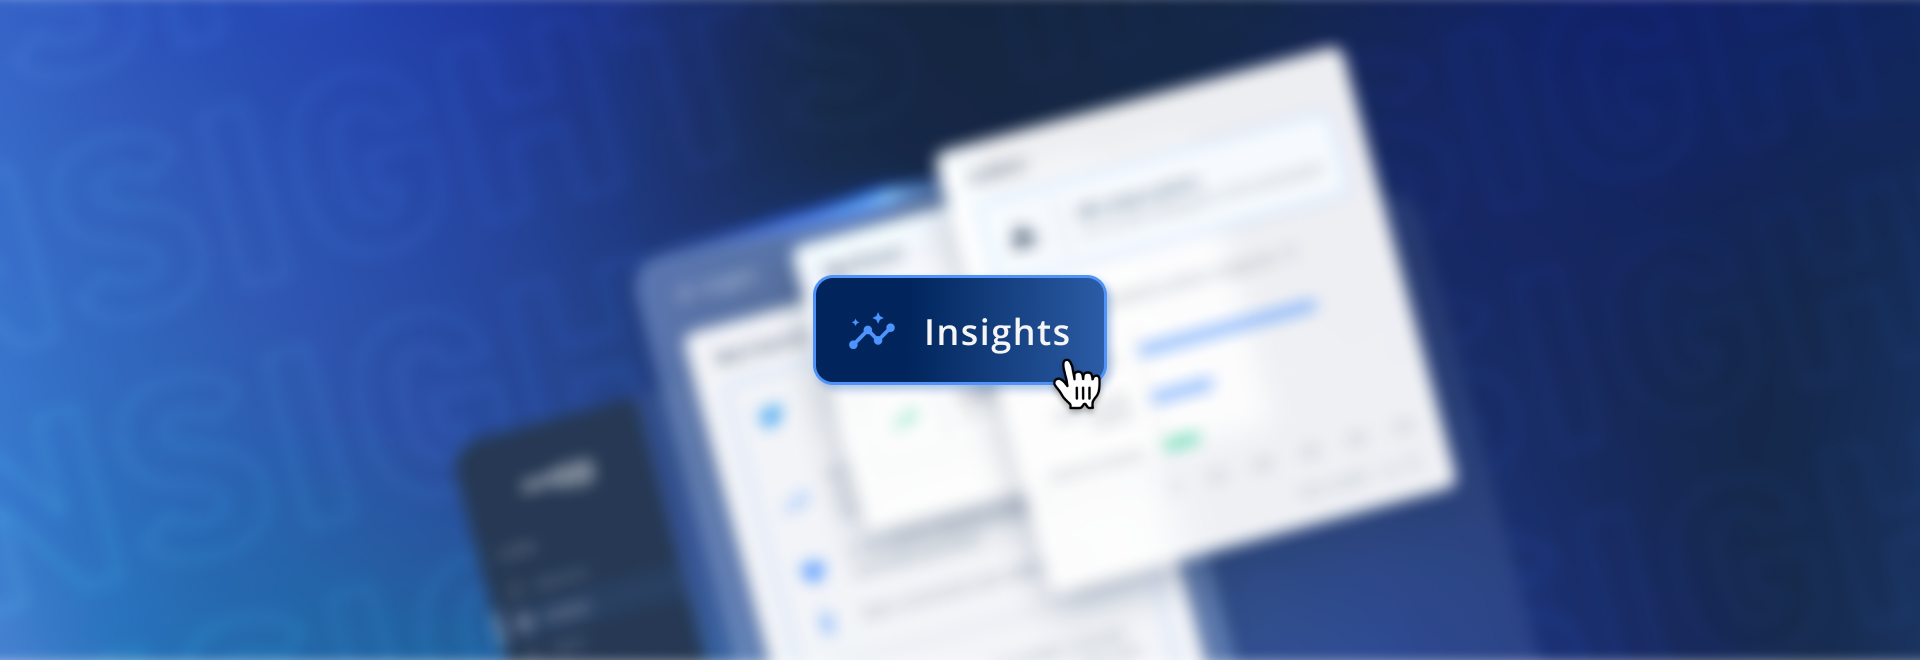 The Insights feature is a game-changer for marketers